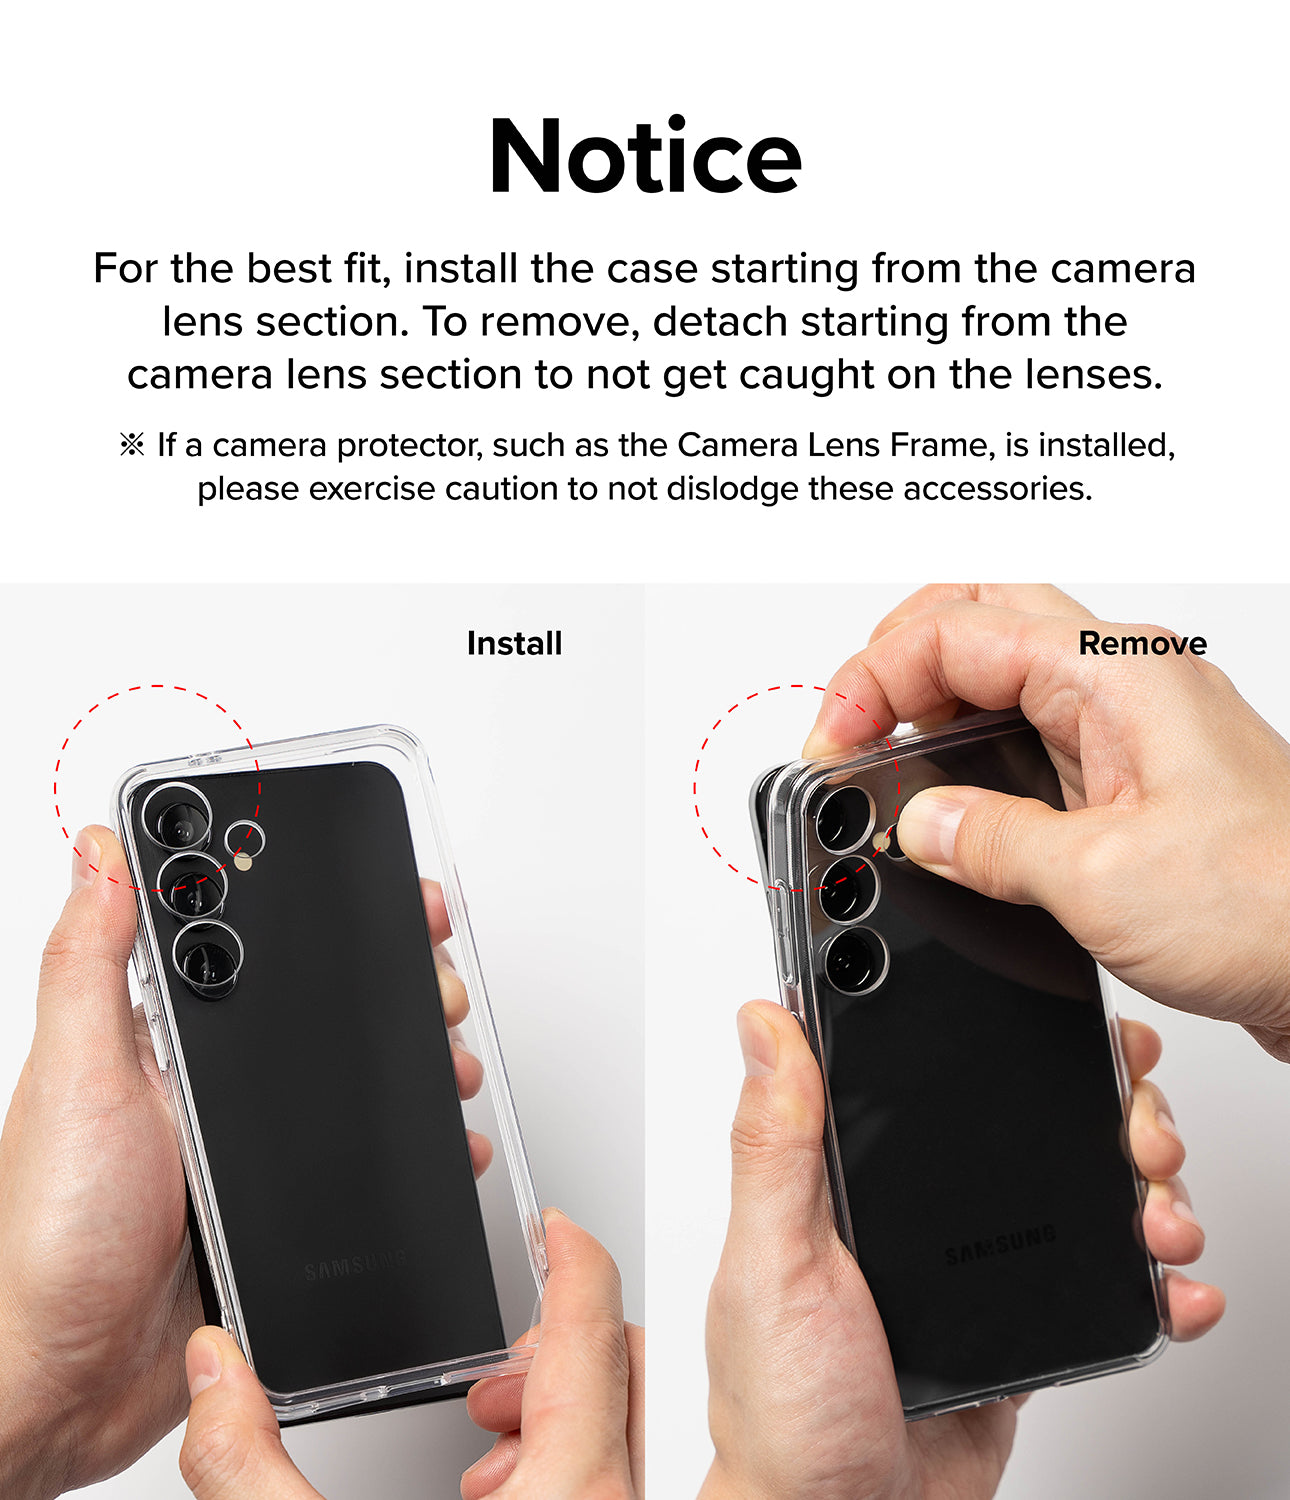 Galaxy S24 Ultra Case | Fusion-X - Notice. For the best fit, install the case starting from the camera lens section. To remove, detach starting form the camera lens section to not get caught on the lenses.